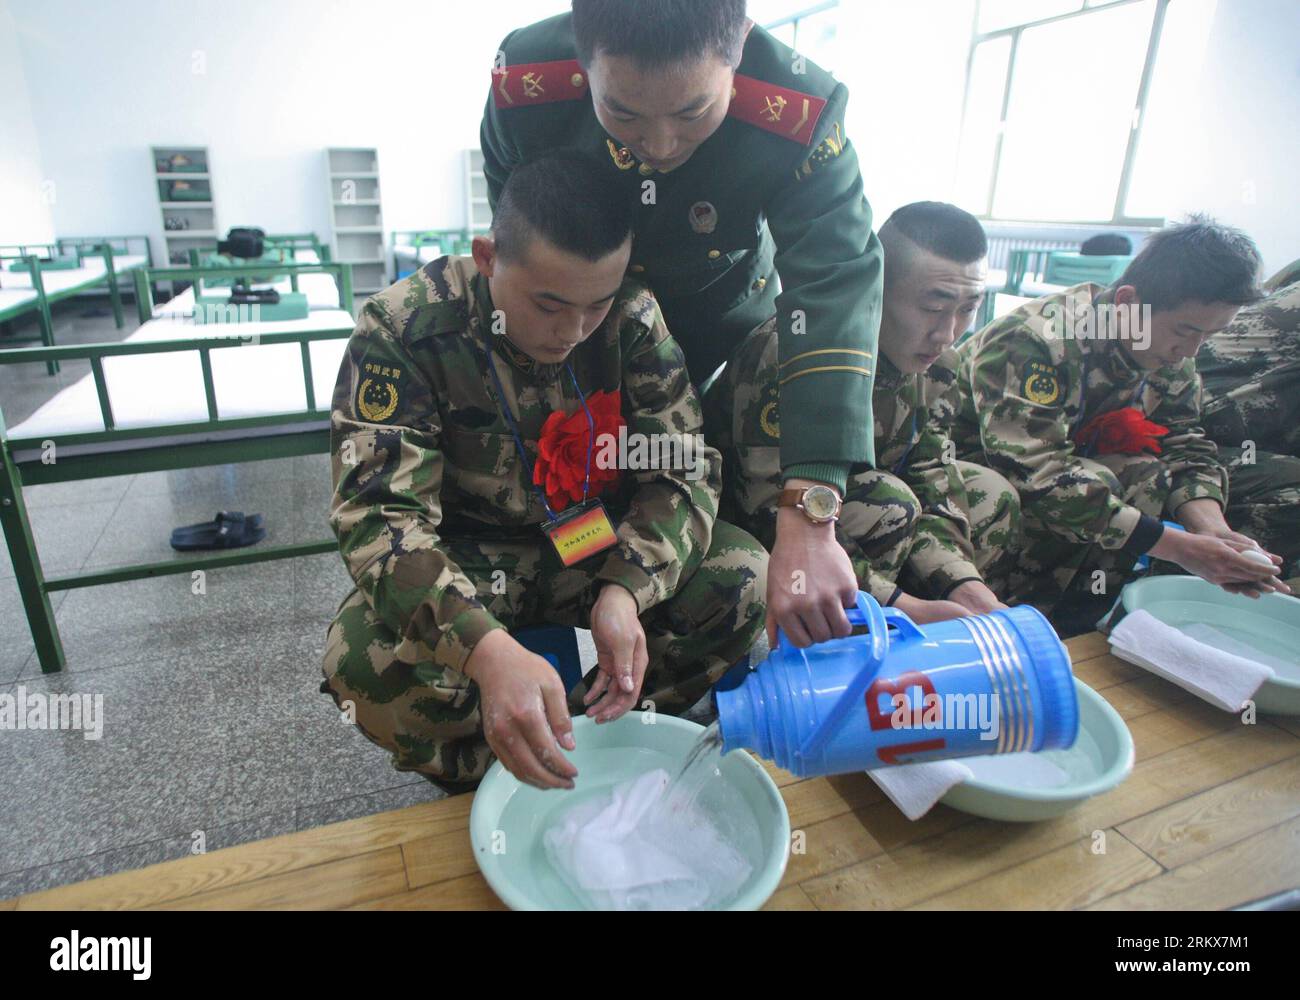 Bildnummer: 58910614  Datum: 12.12.2012  Copyright: imago/Xinhua (121212) -- HOHHOT, Dec. 12, 2012 (Xinhua) -- Newly recruited para-military policemen wash their faces upon their arrival at their barrack in Hohhot, north China s Inner Mongolia Autonomous Region, Dec. 12, 2012. Newly recruited soldiers of People s Liberation Army (PLA) and para-military policemen joined their units around the country recently. (Xinhua/Zhang Fan) (zn) CHINA-HOHHOT-MILITARY-NEW RECUITS (CN) PUBLICATIONxNOTxINxCHN Gesellschaft Militär Rekruten Einberufung x0x xac 2012 quer      58910614 Date 12 12 2012 Copyright I Stock Photo